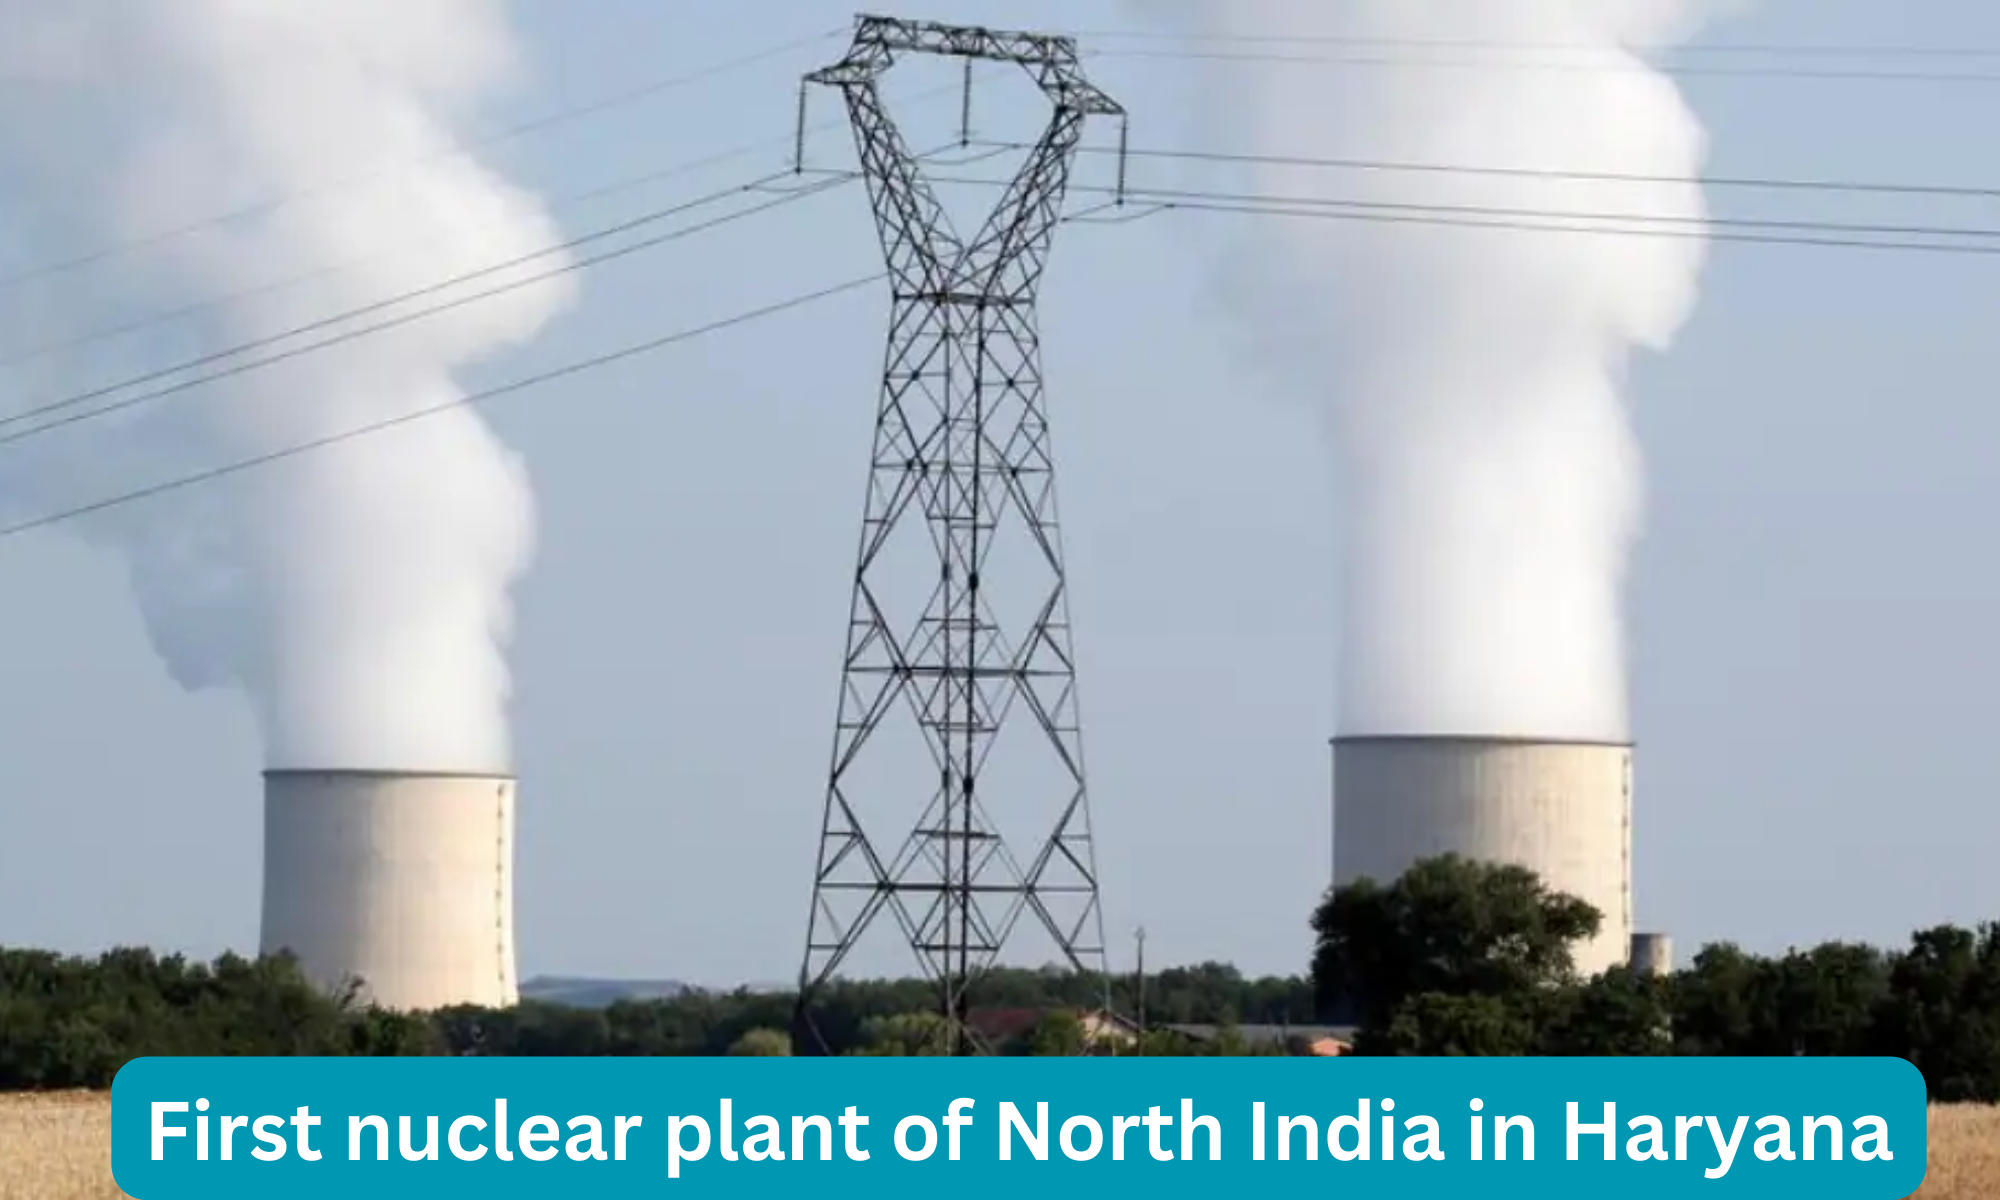 First nuclear plant of North India in Haryana